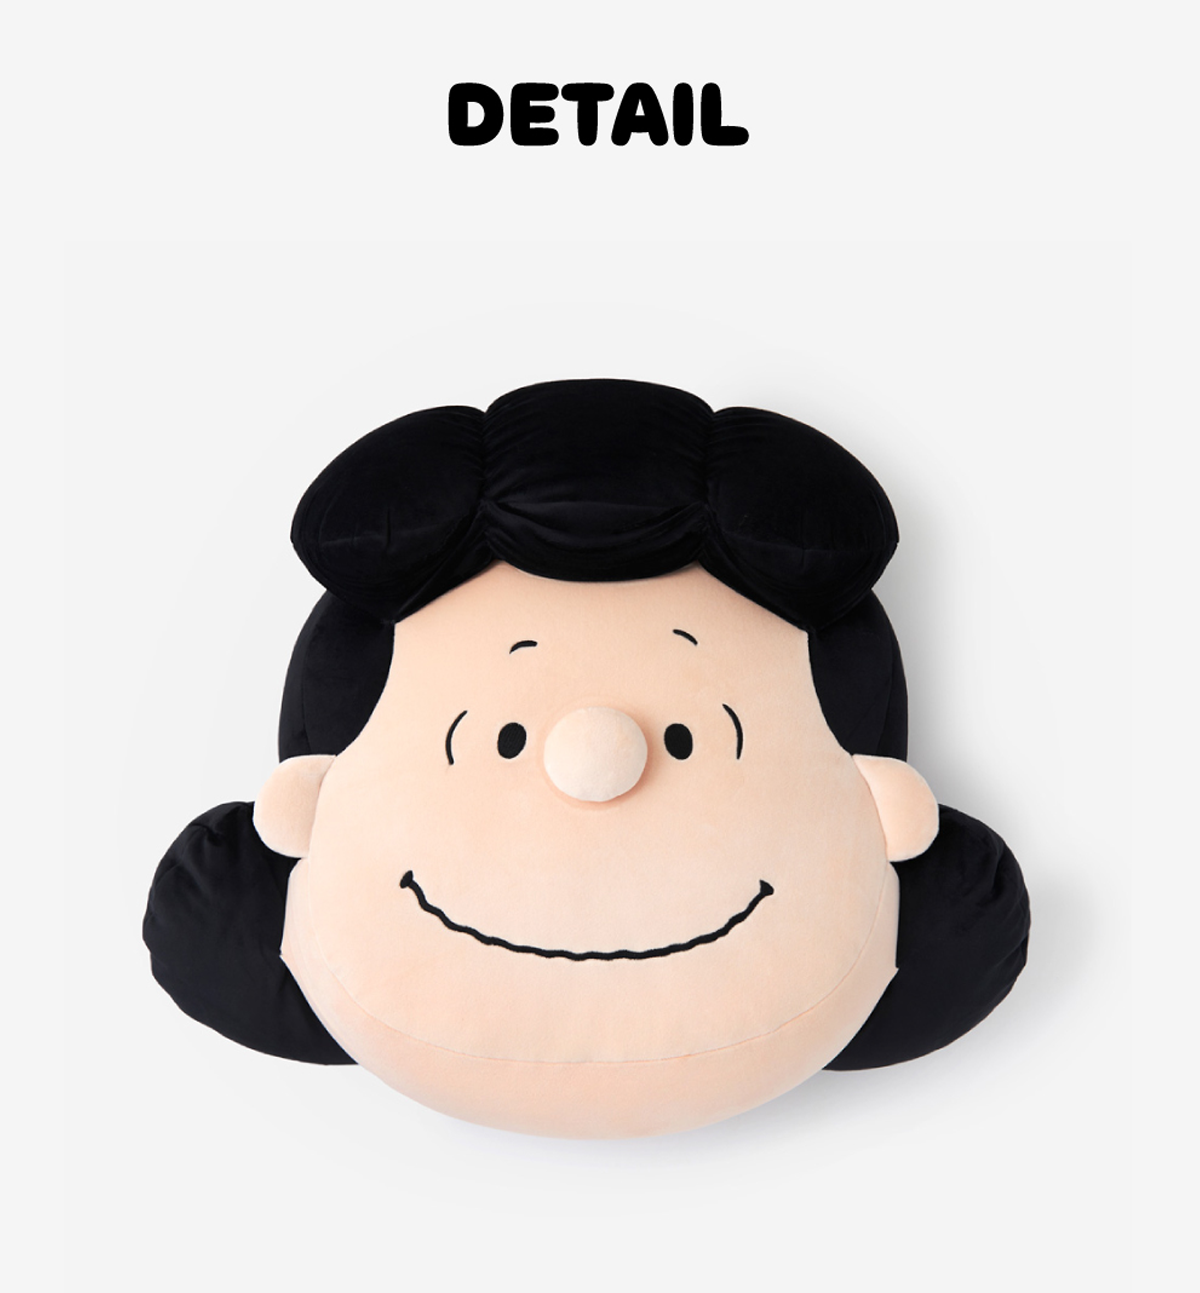 Peanuts Face Cushion [Lucy]